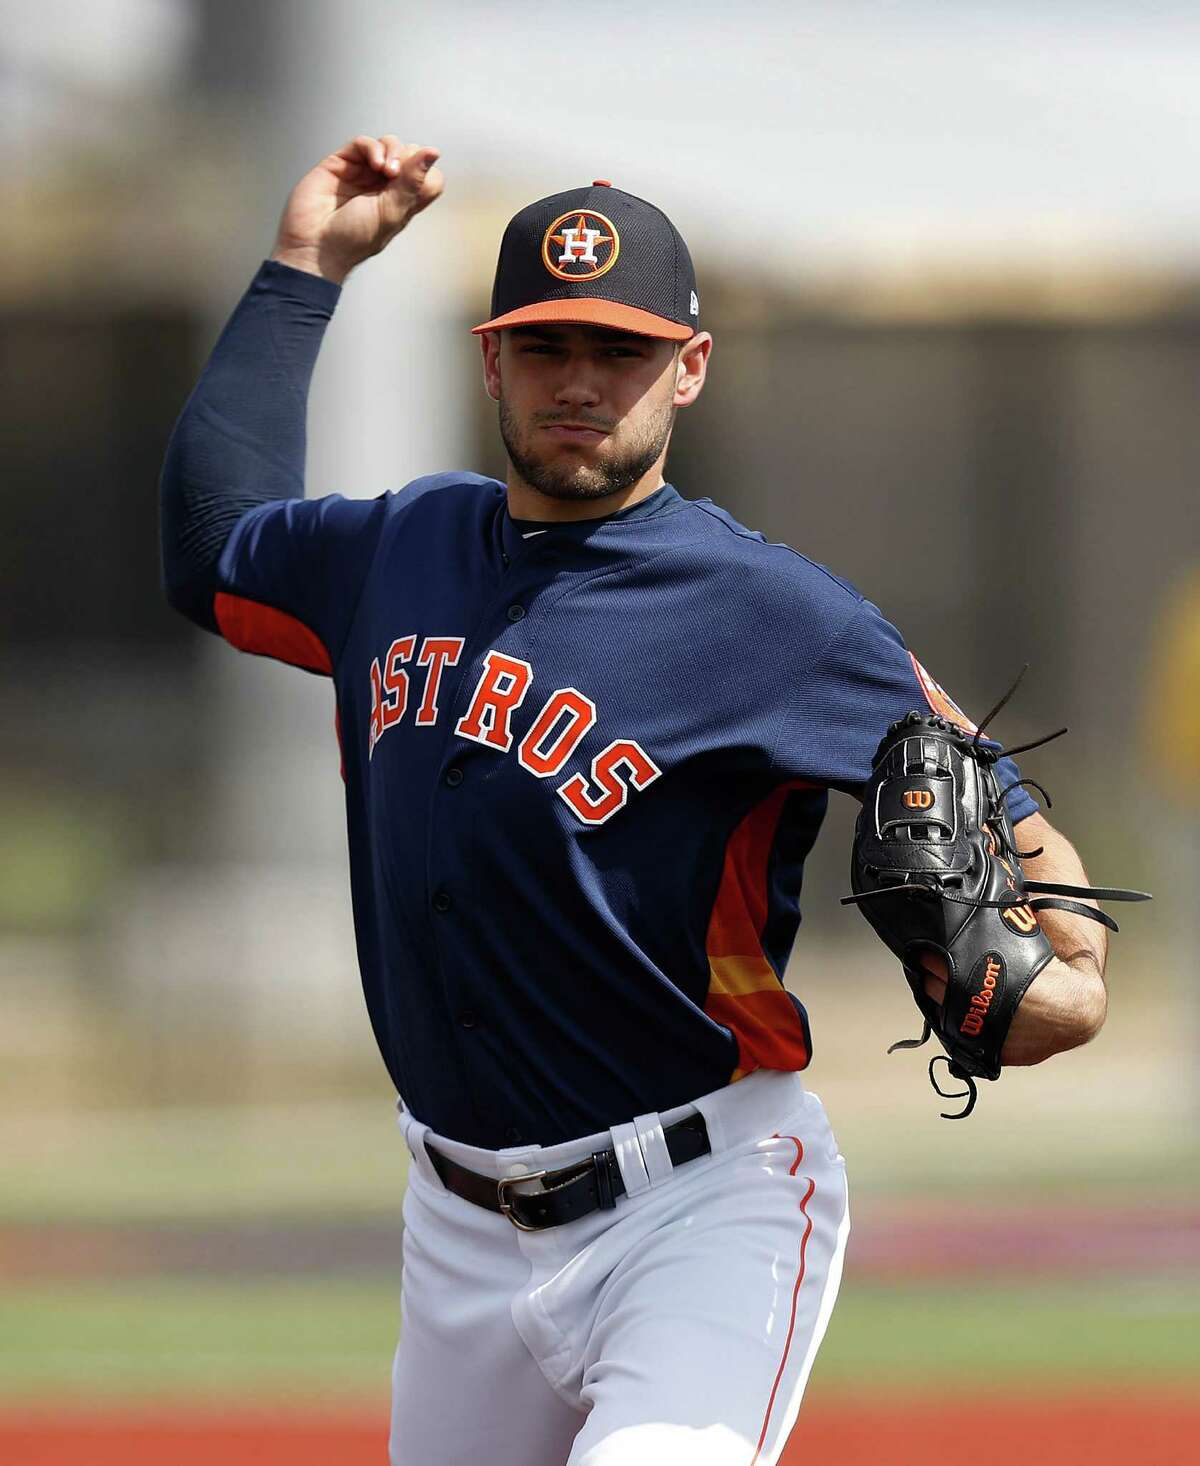 Houston Astros starting pitcher Lance McCullers works through a drill as the Astros pitchers and catchers held their first workout of spring training at The Ballpark of the Palm Beaches, in West Palm Beach, Florida, Tuesday, February 14, 2017.